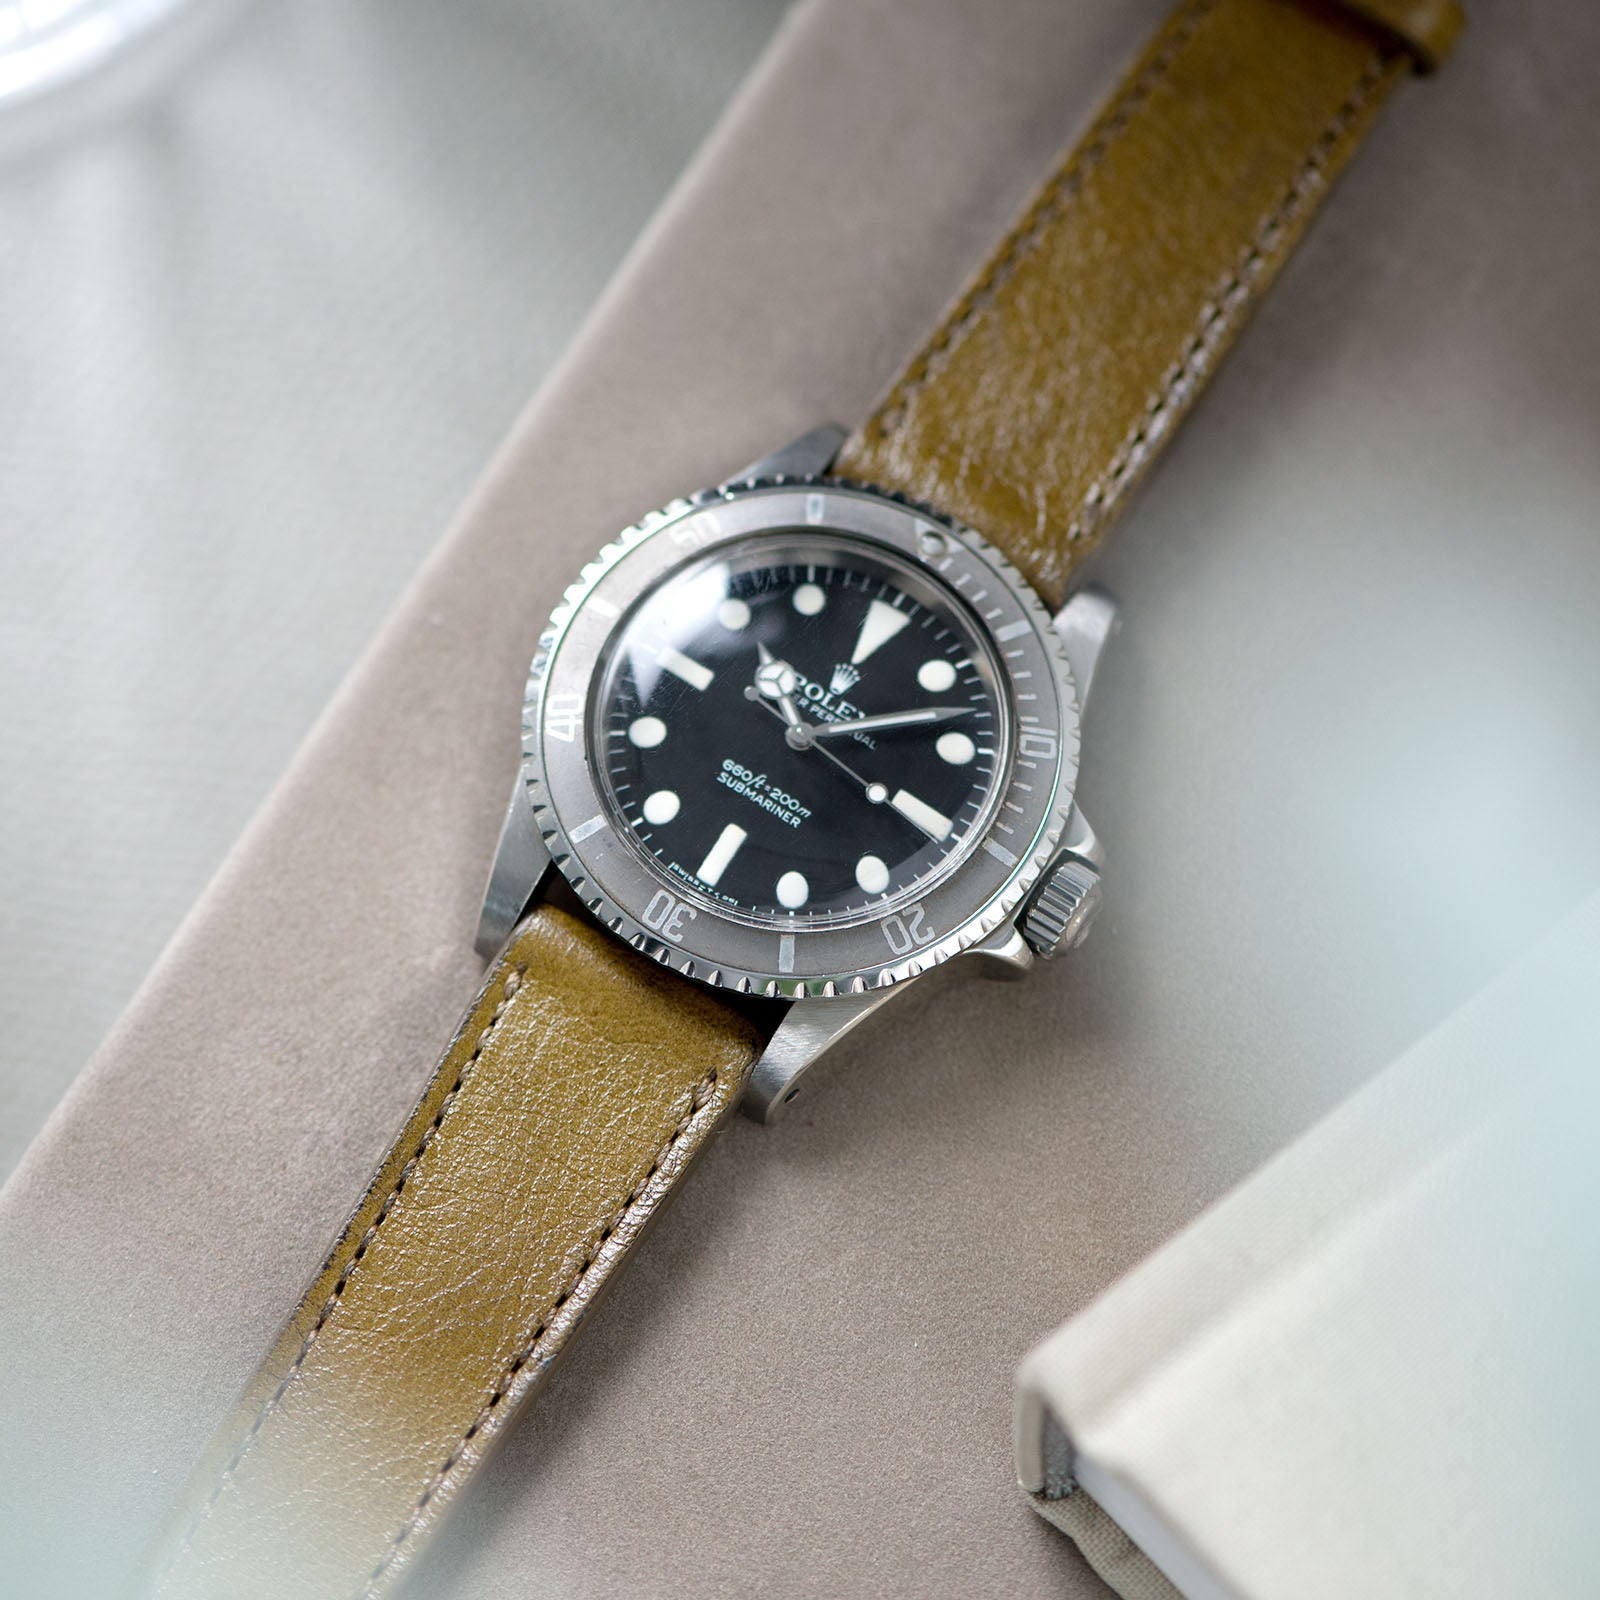 Light Olive Green Leather Watch Strap